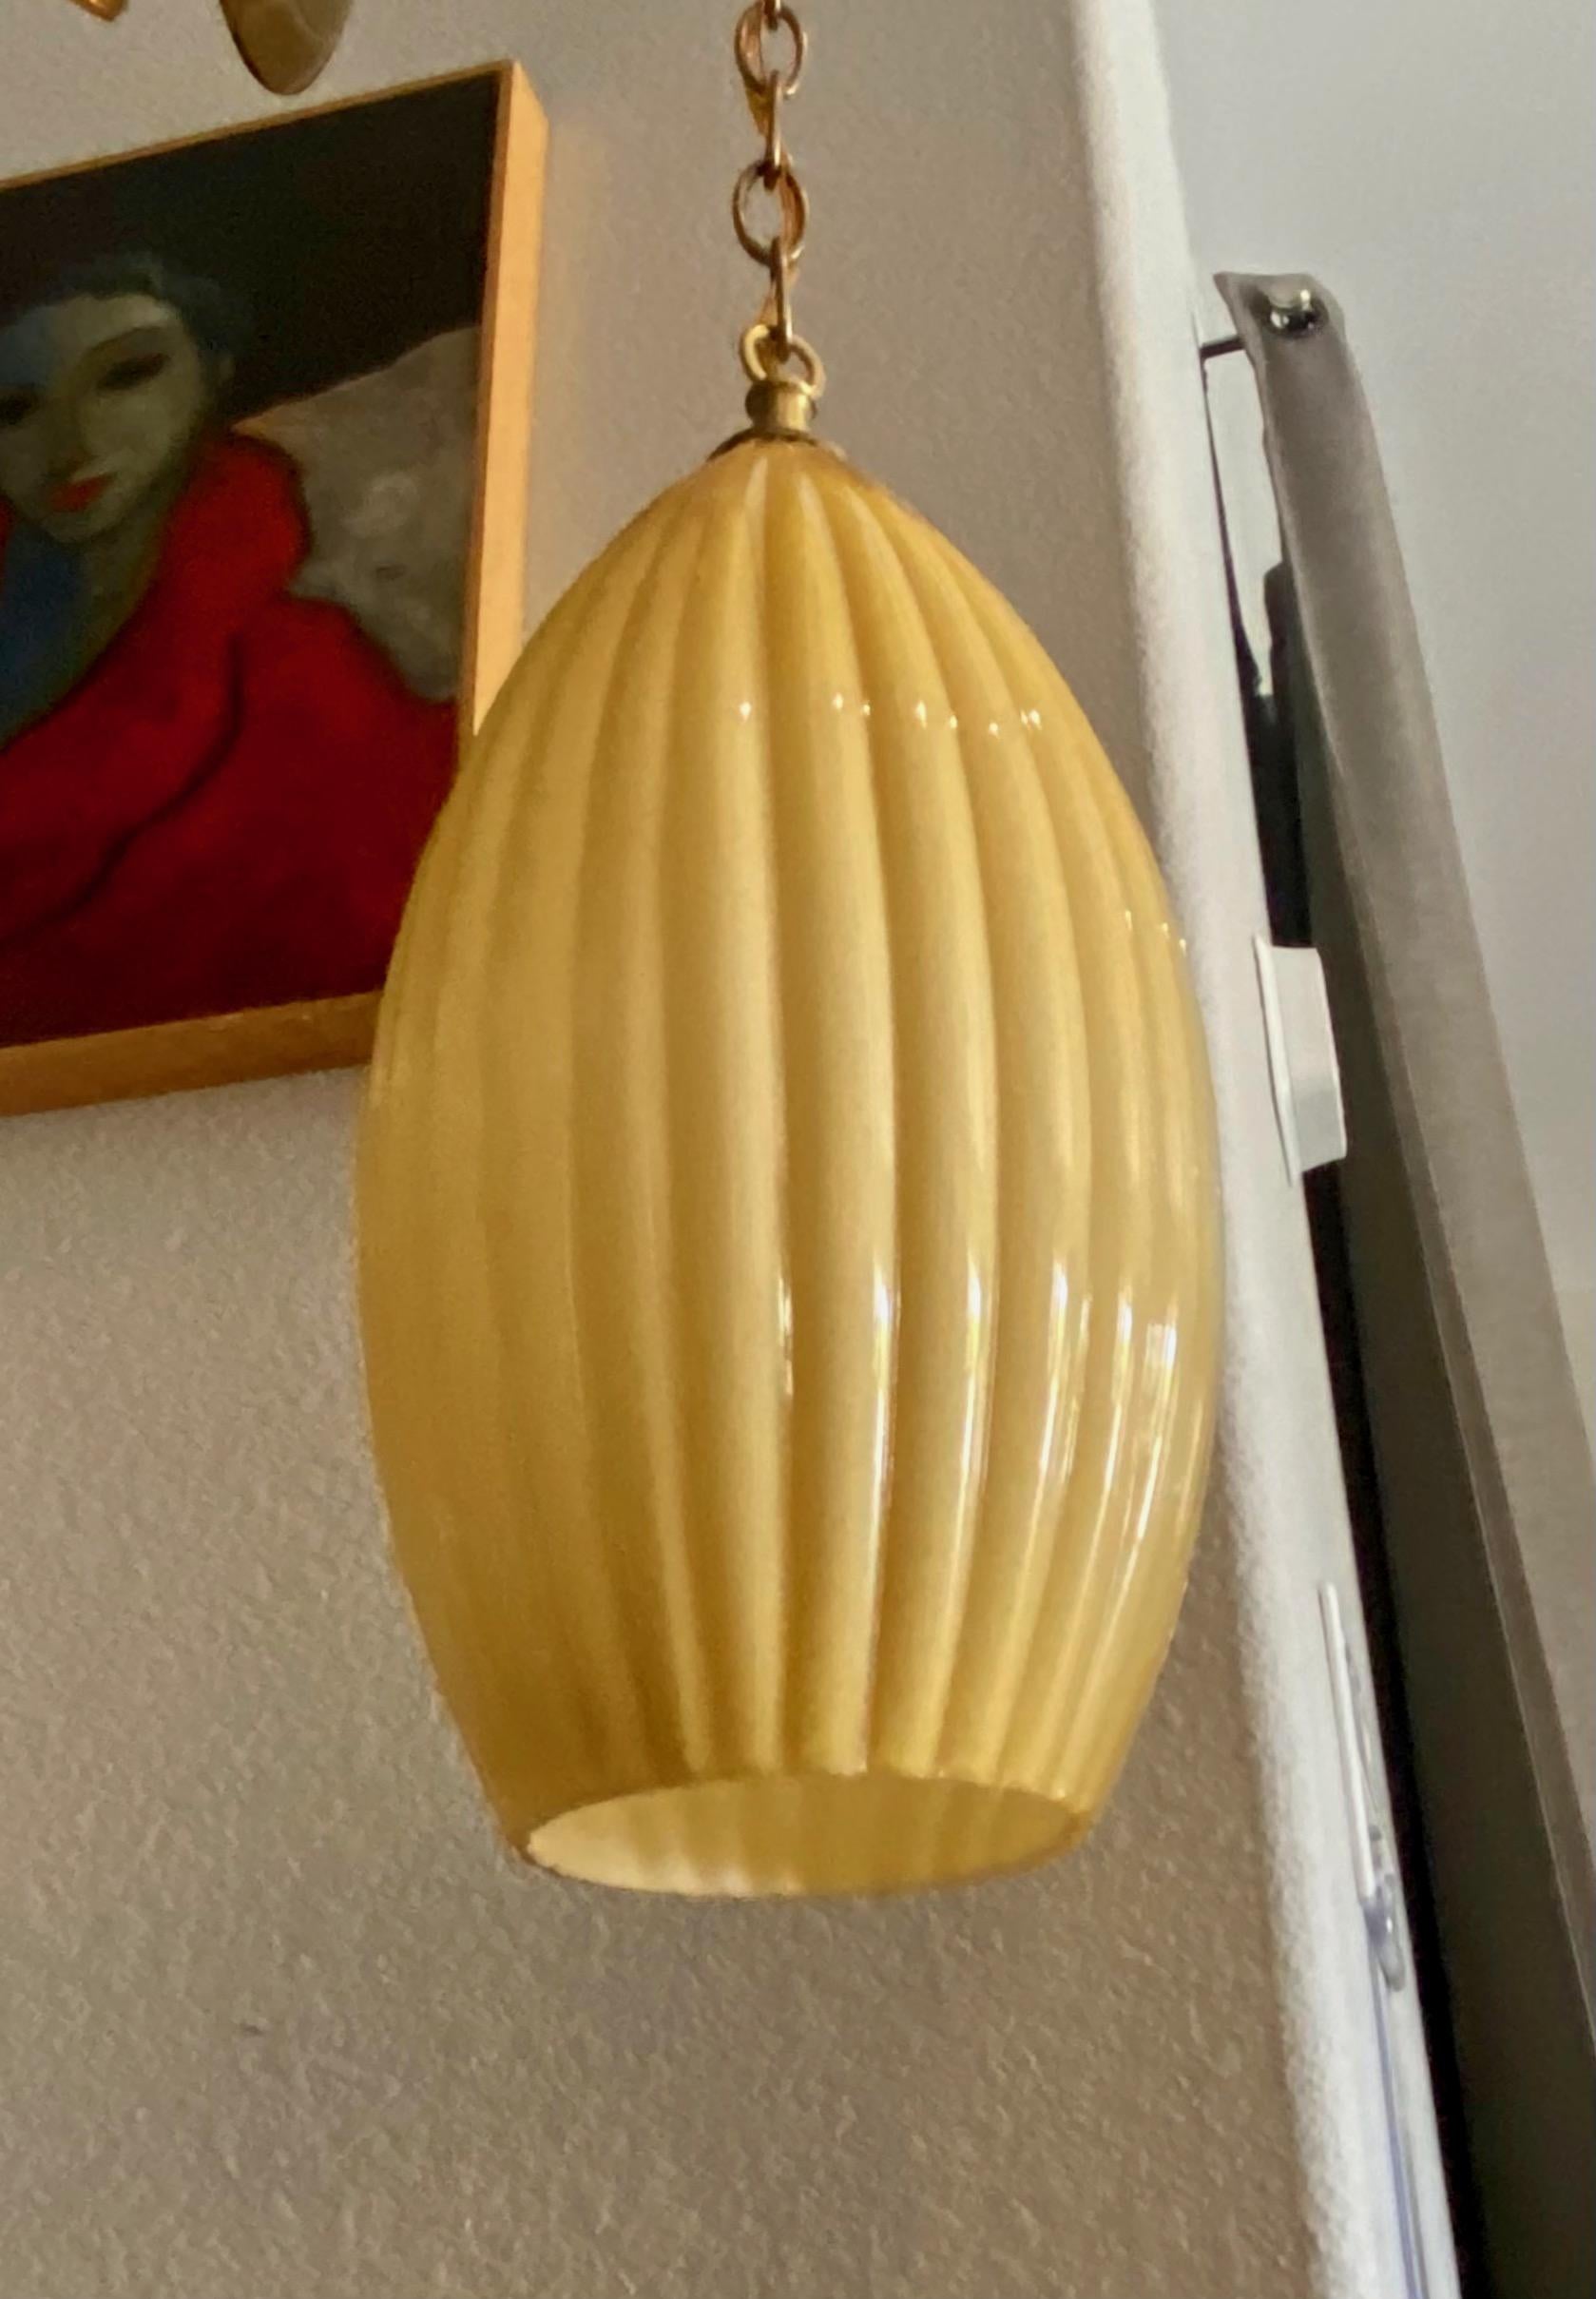 Single Murano Italian cased glass ribbed hanging ceiling pendant light, in a yellow butterscotch color. The glass gives a beautiful sunset yellow glow when lighted. Newly wired for US using single regular A base bulb. Incudes brass fittings, chain